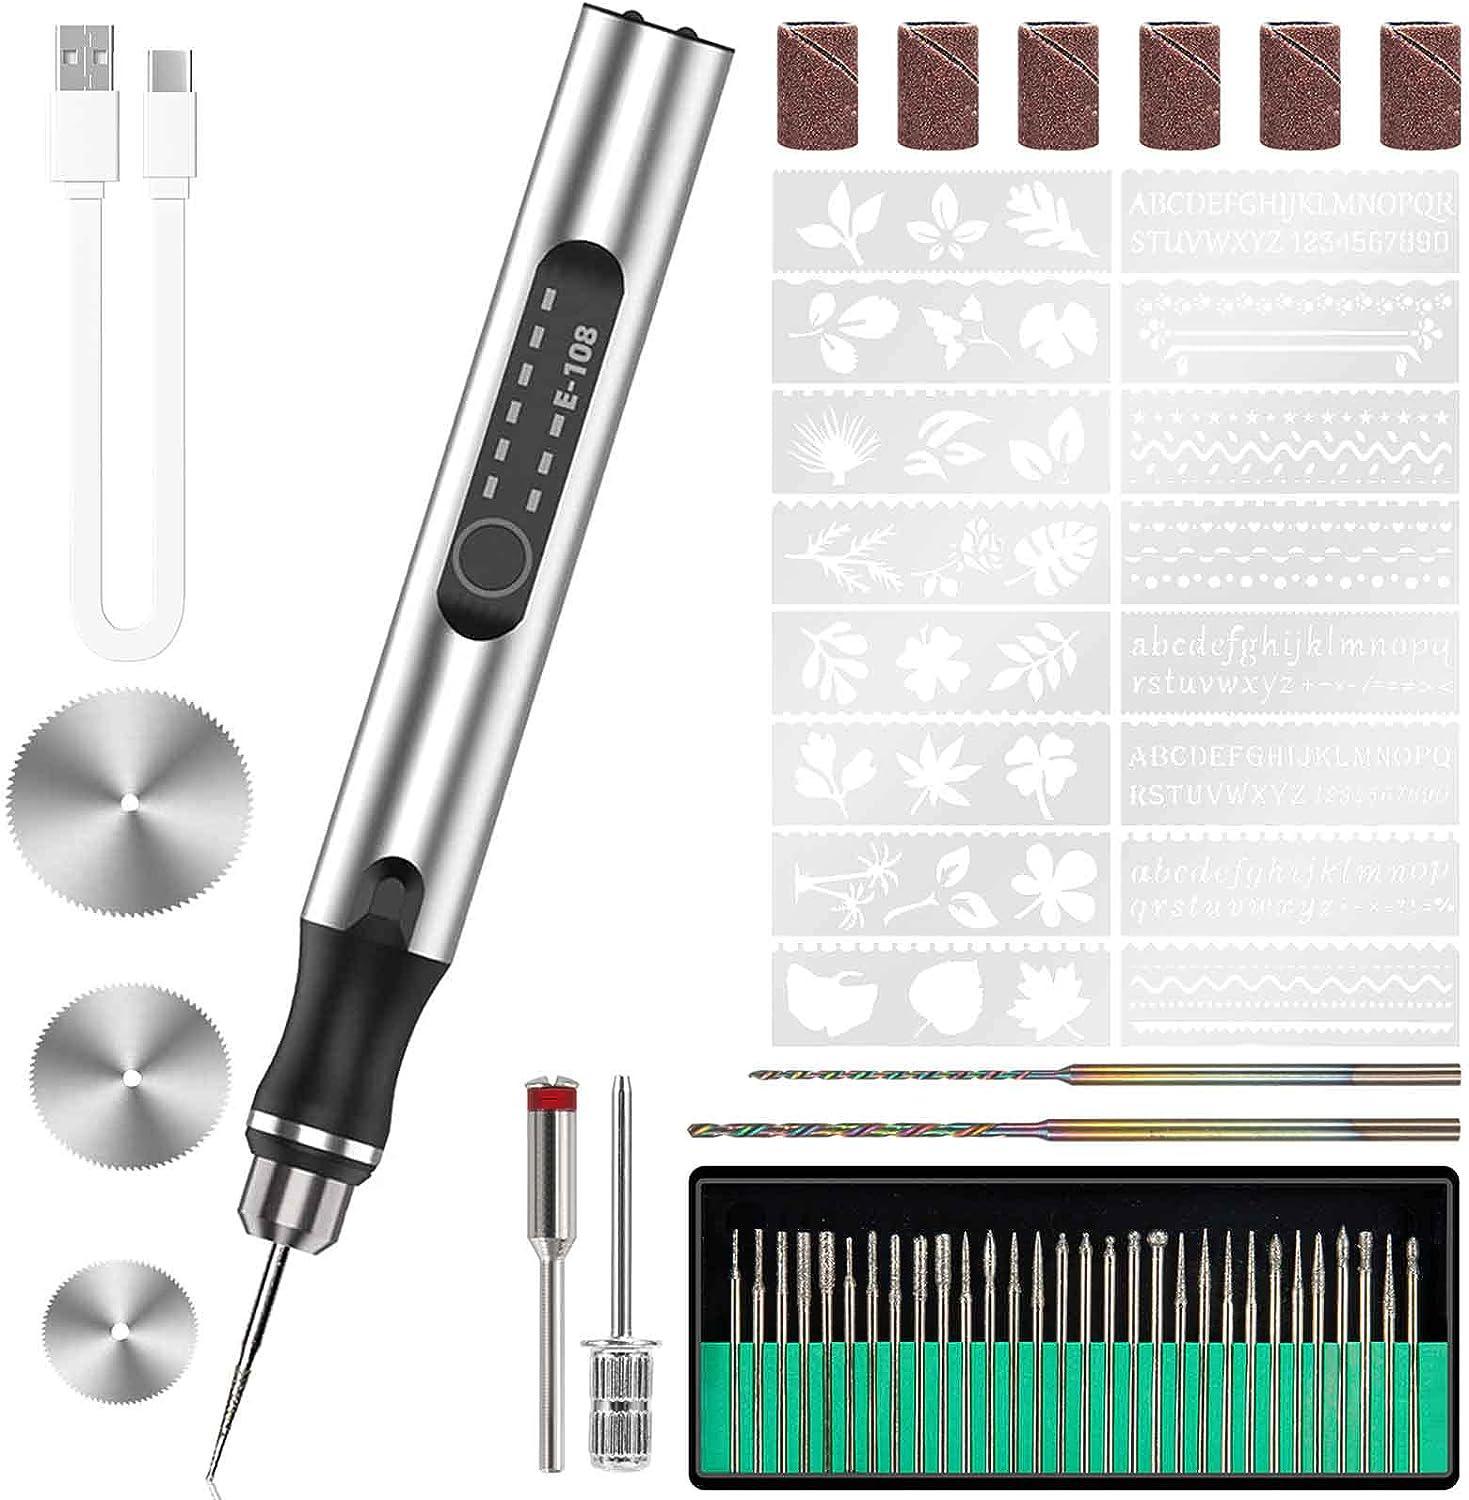 Rechargeable cordless Electric Micro Engraver Pen Mini DIY Engraving Tool  Kit for Metal Glass Ceramic Plastic Wood Jewelry with 30 Bits and 16